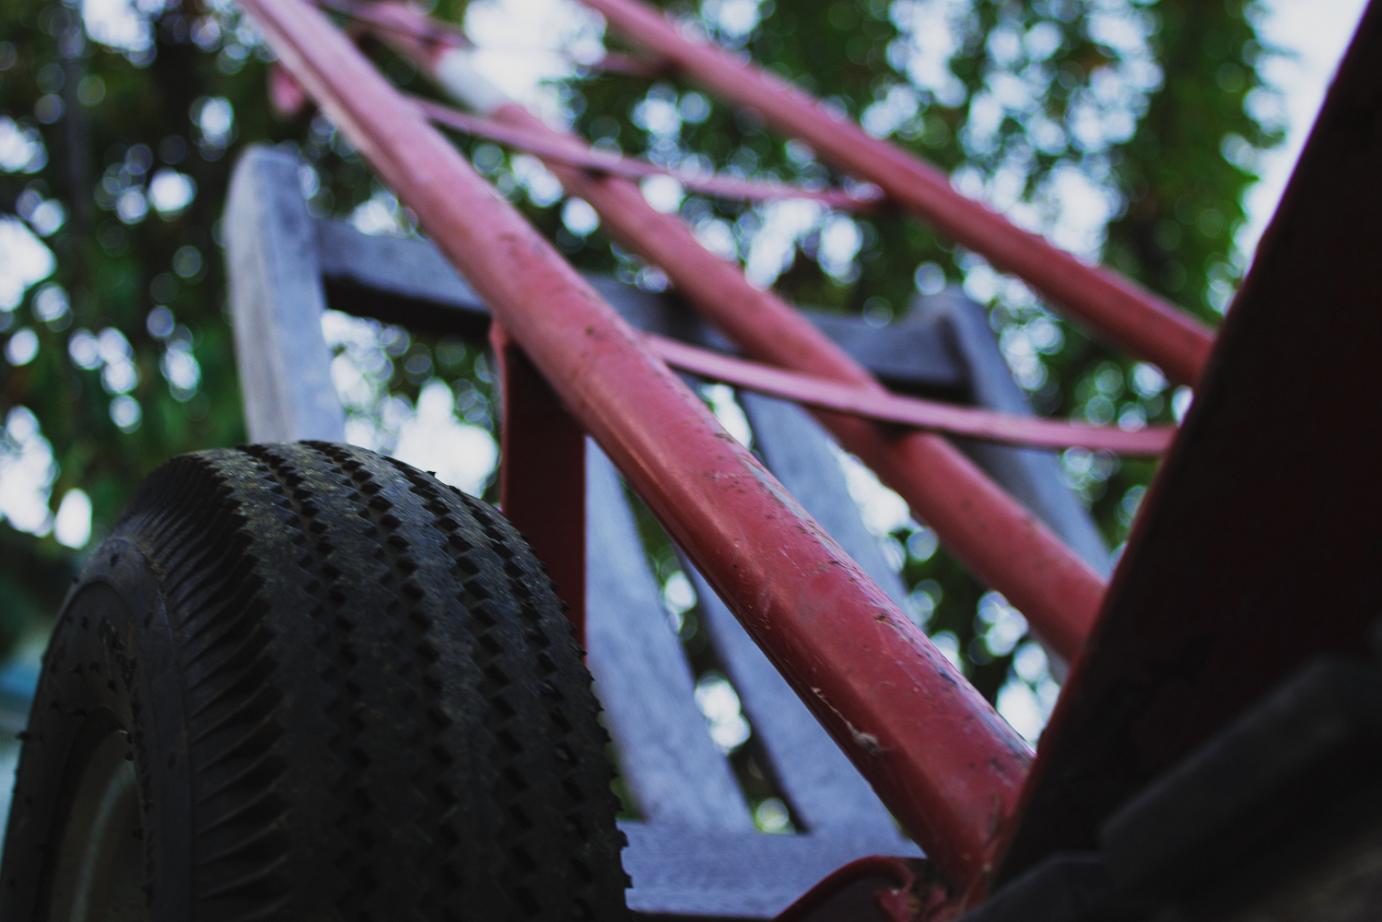 The image depicts a close-up shot of the wheel of a trolley from beneath.